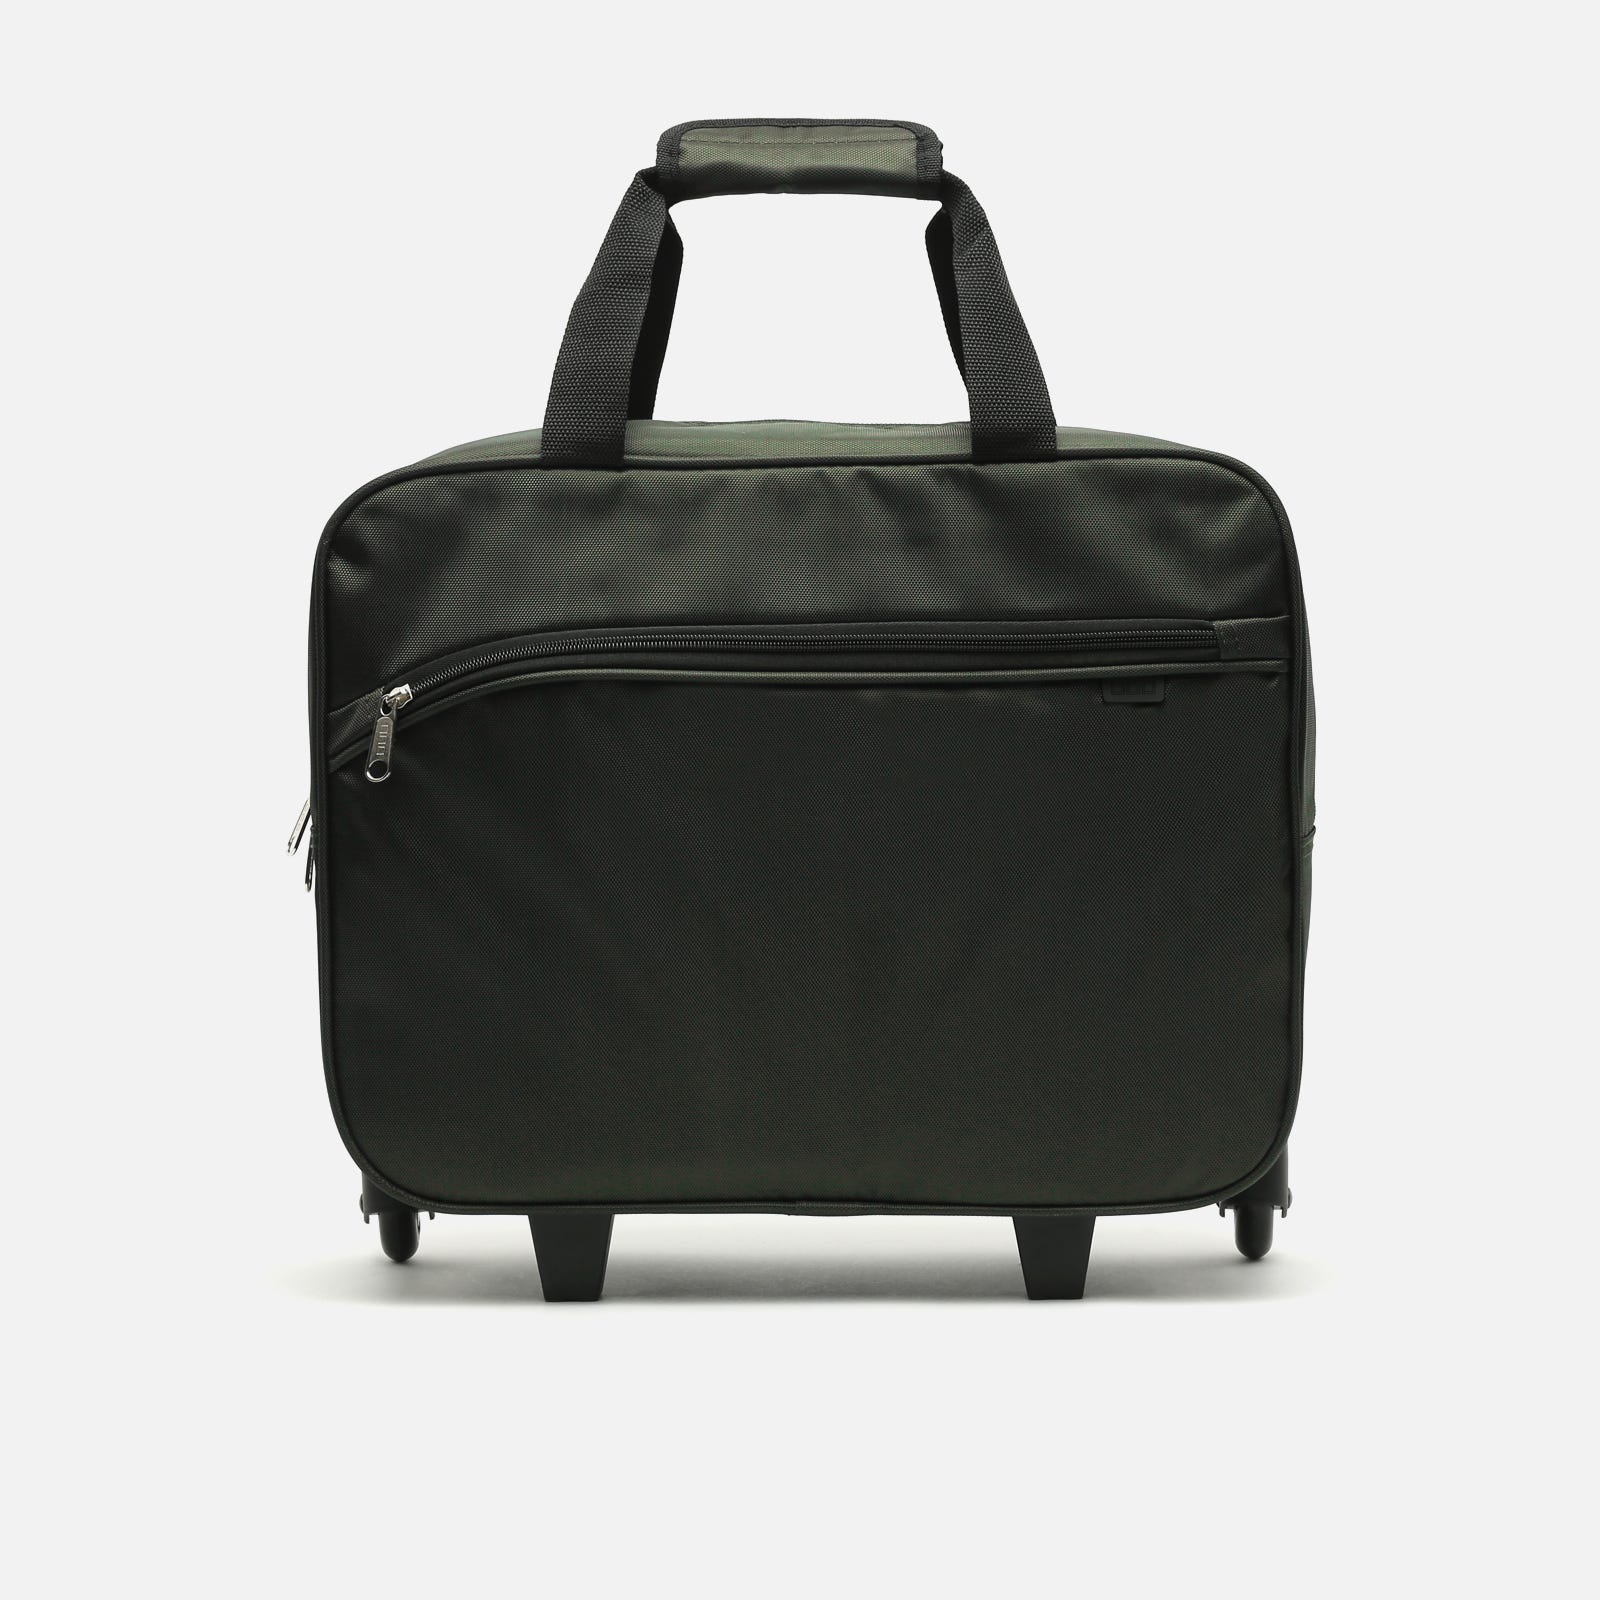 Franc briefcase with wheels